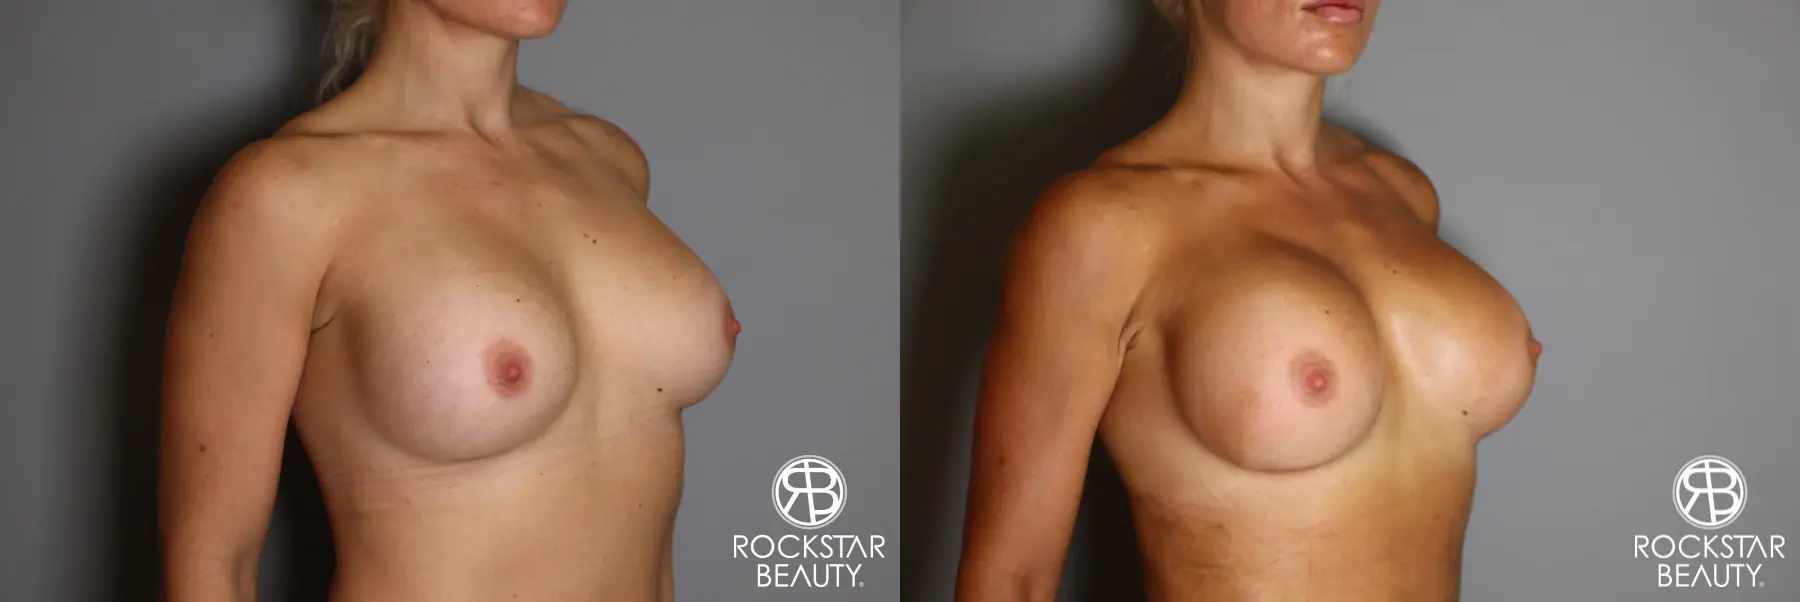 Breast Implant Exchange: Patient 9 - Before and After 2